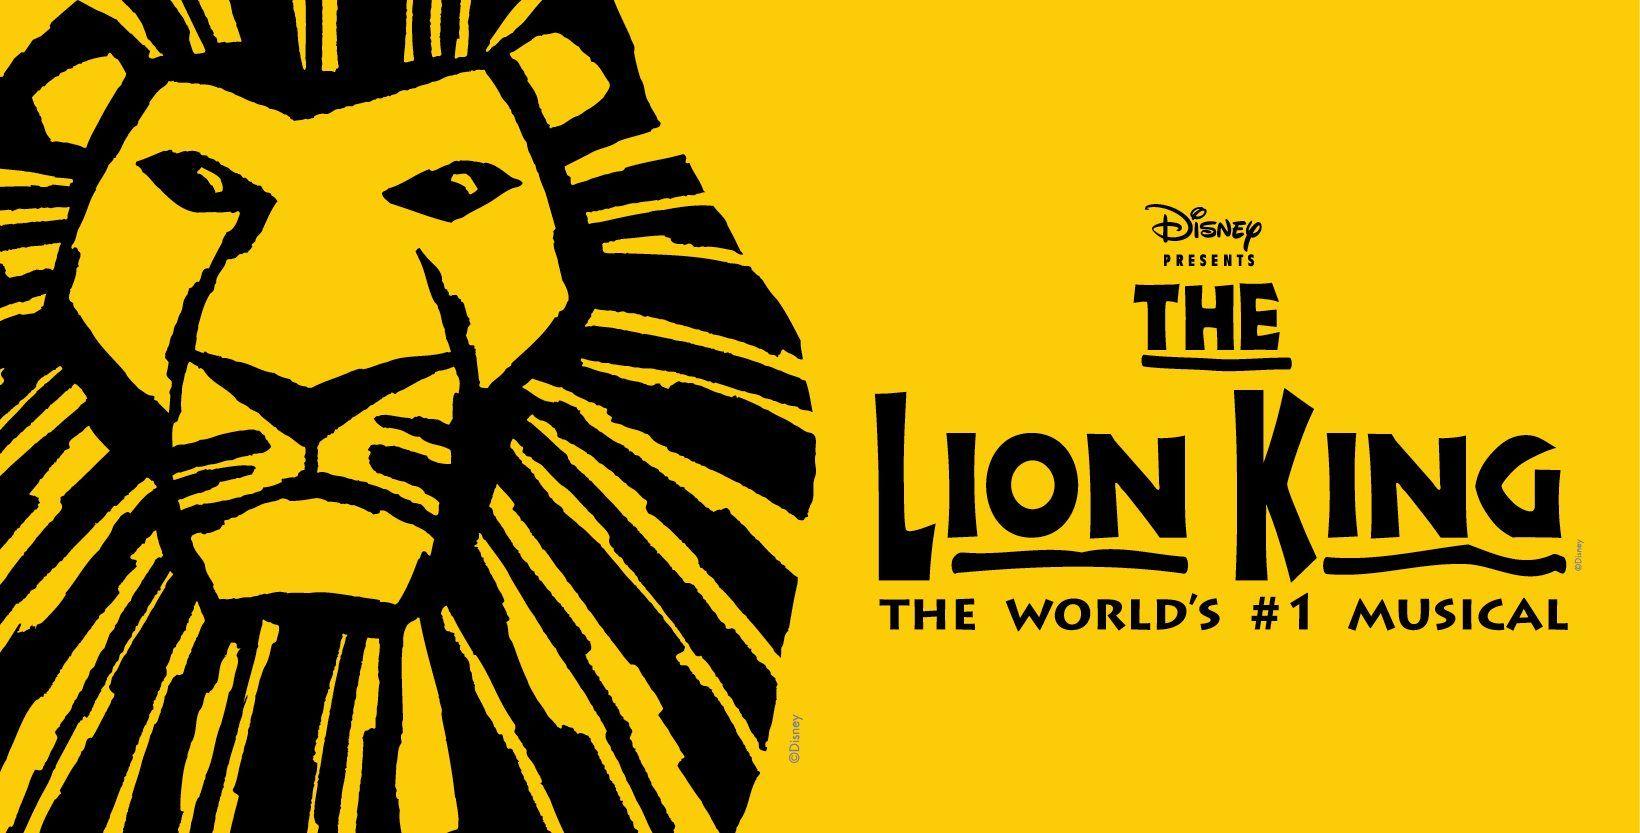 download civic center the lion king